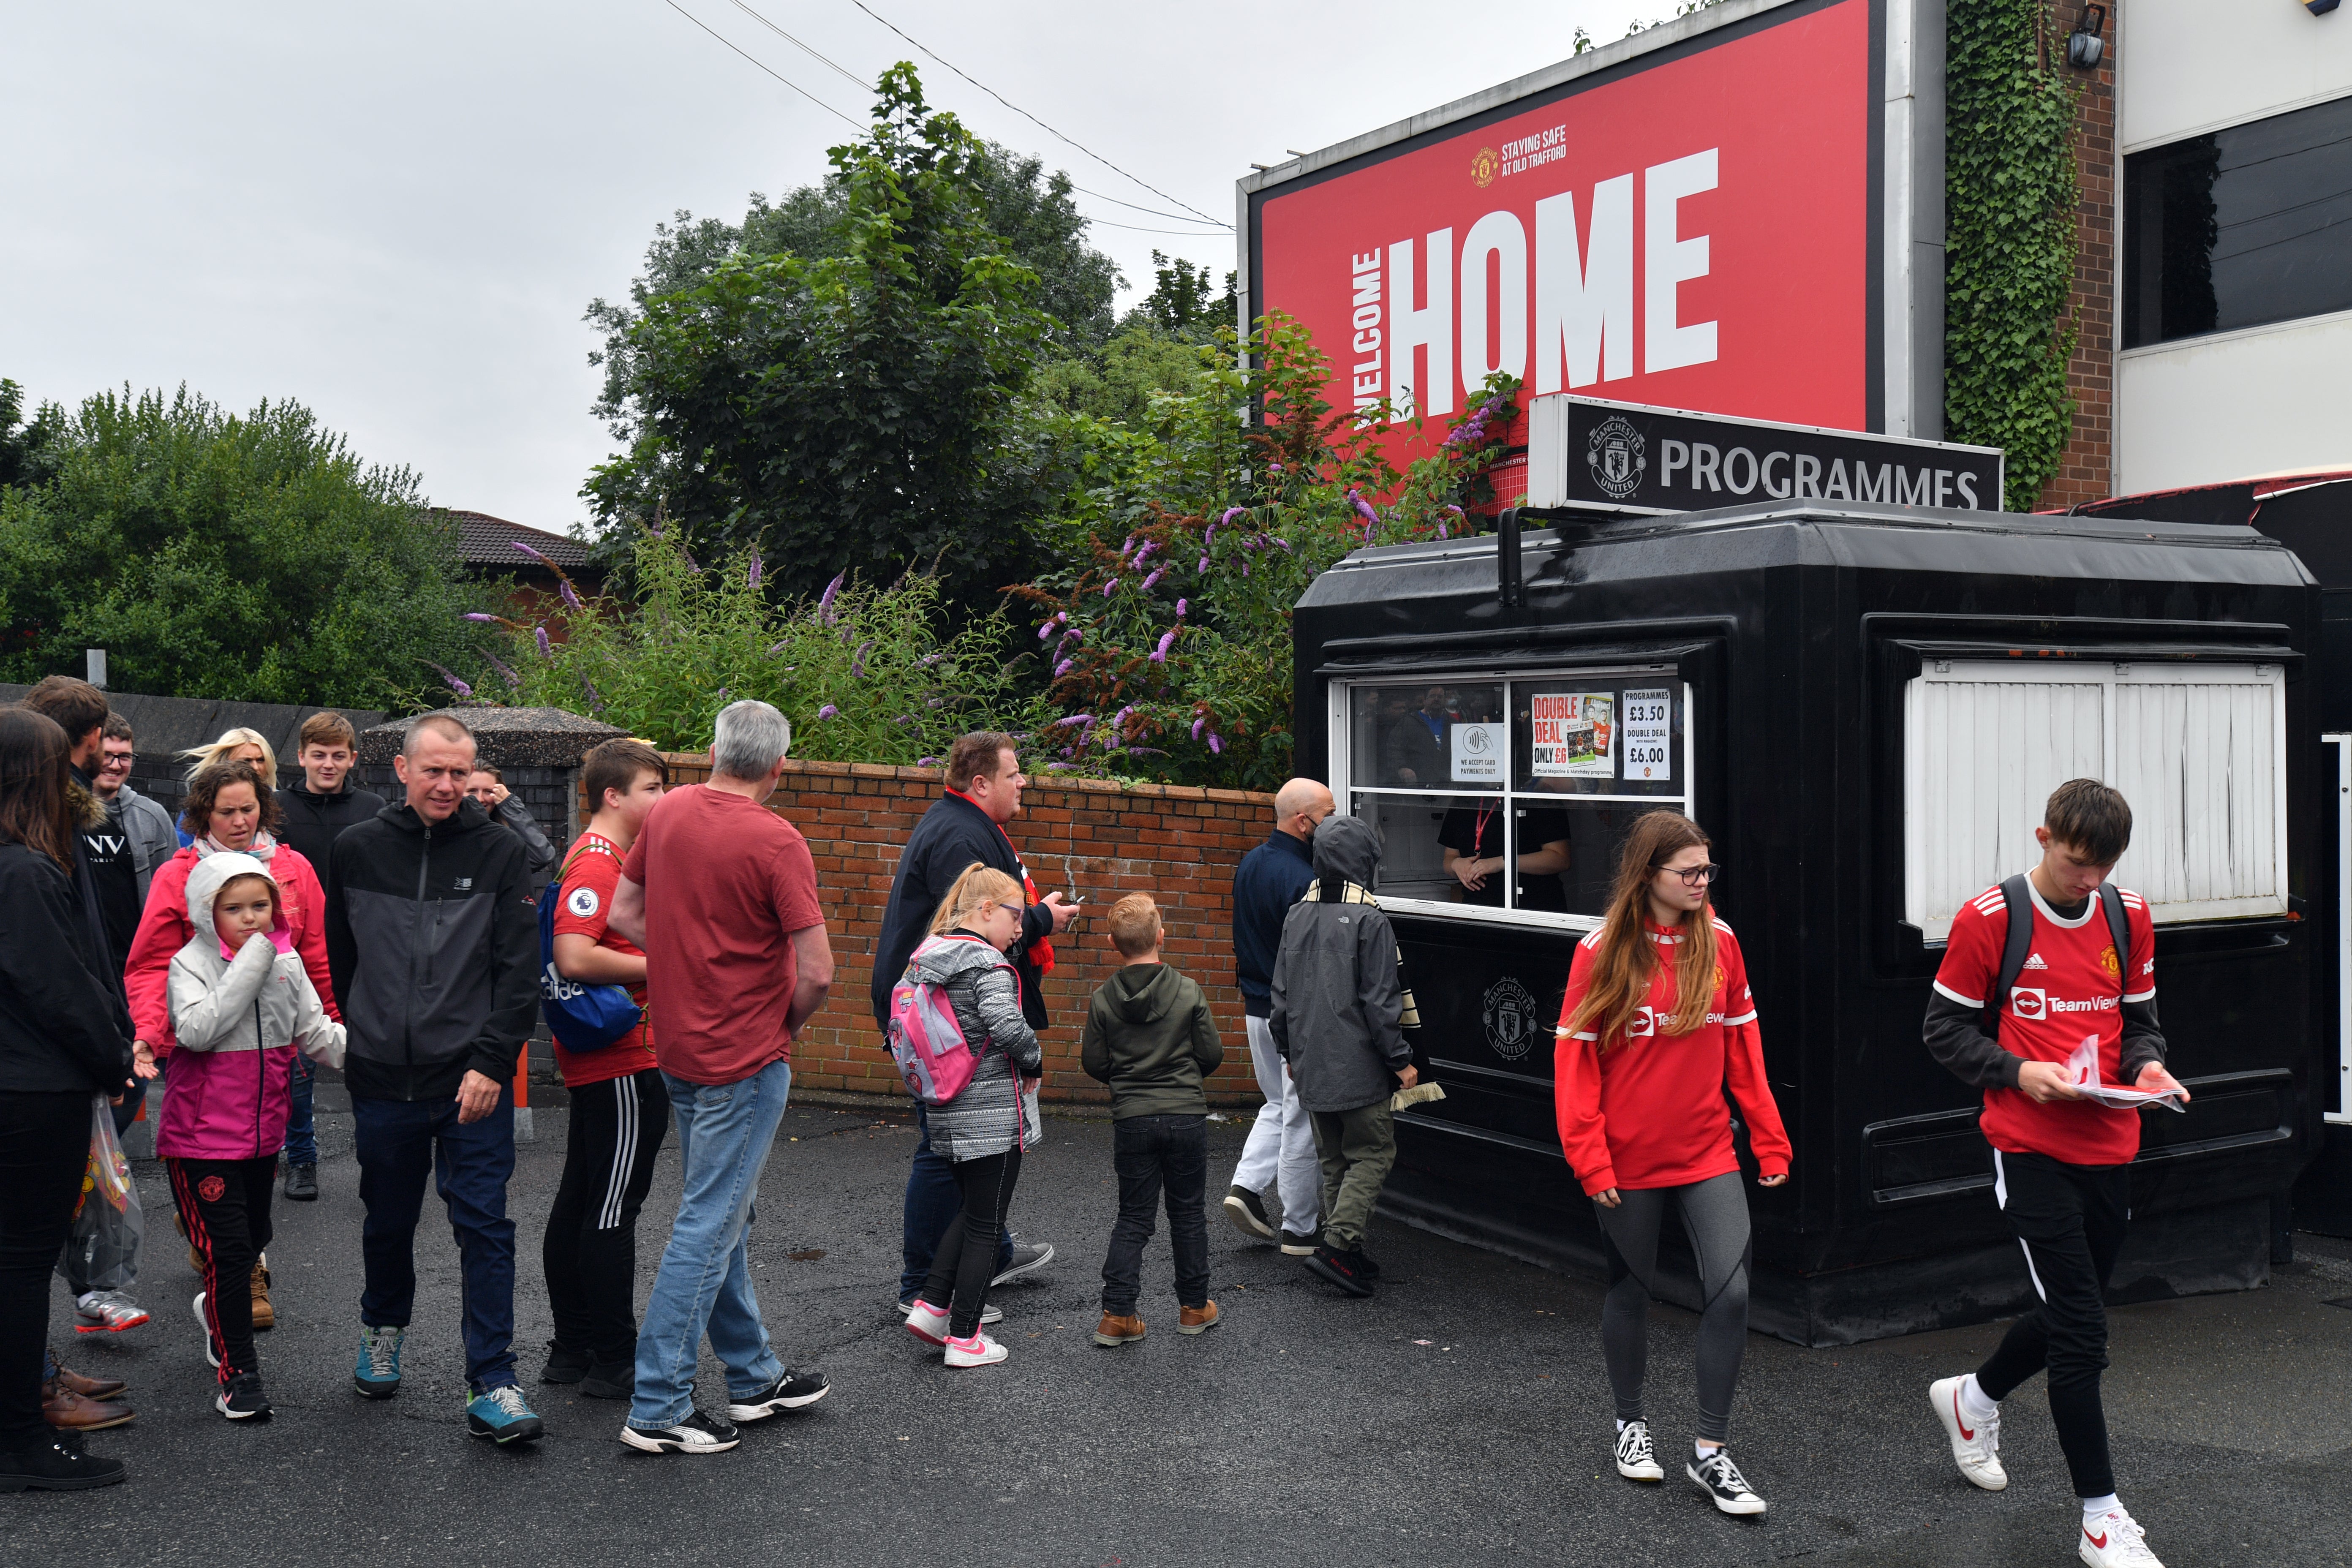 Fans purchase programmes at Old Trafford ahead of Manchester United’s friendly against Everton (Anthony Devlin/PA).